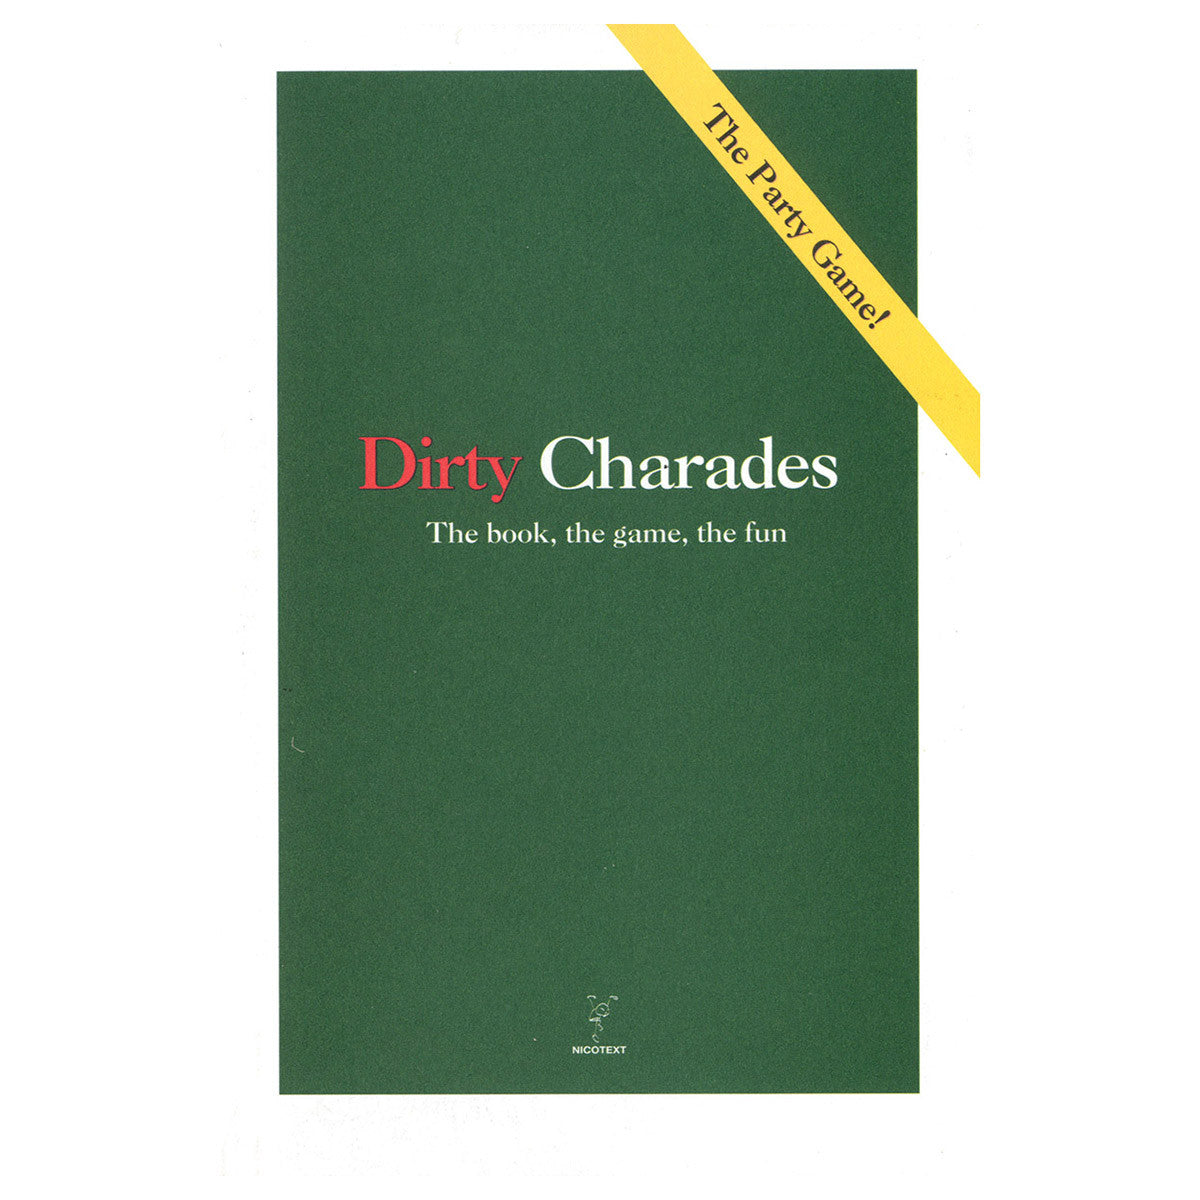 Dirty Charades: The Book, the Game, the Fun